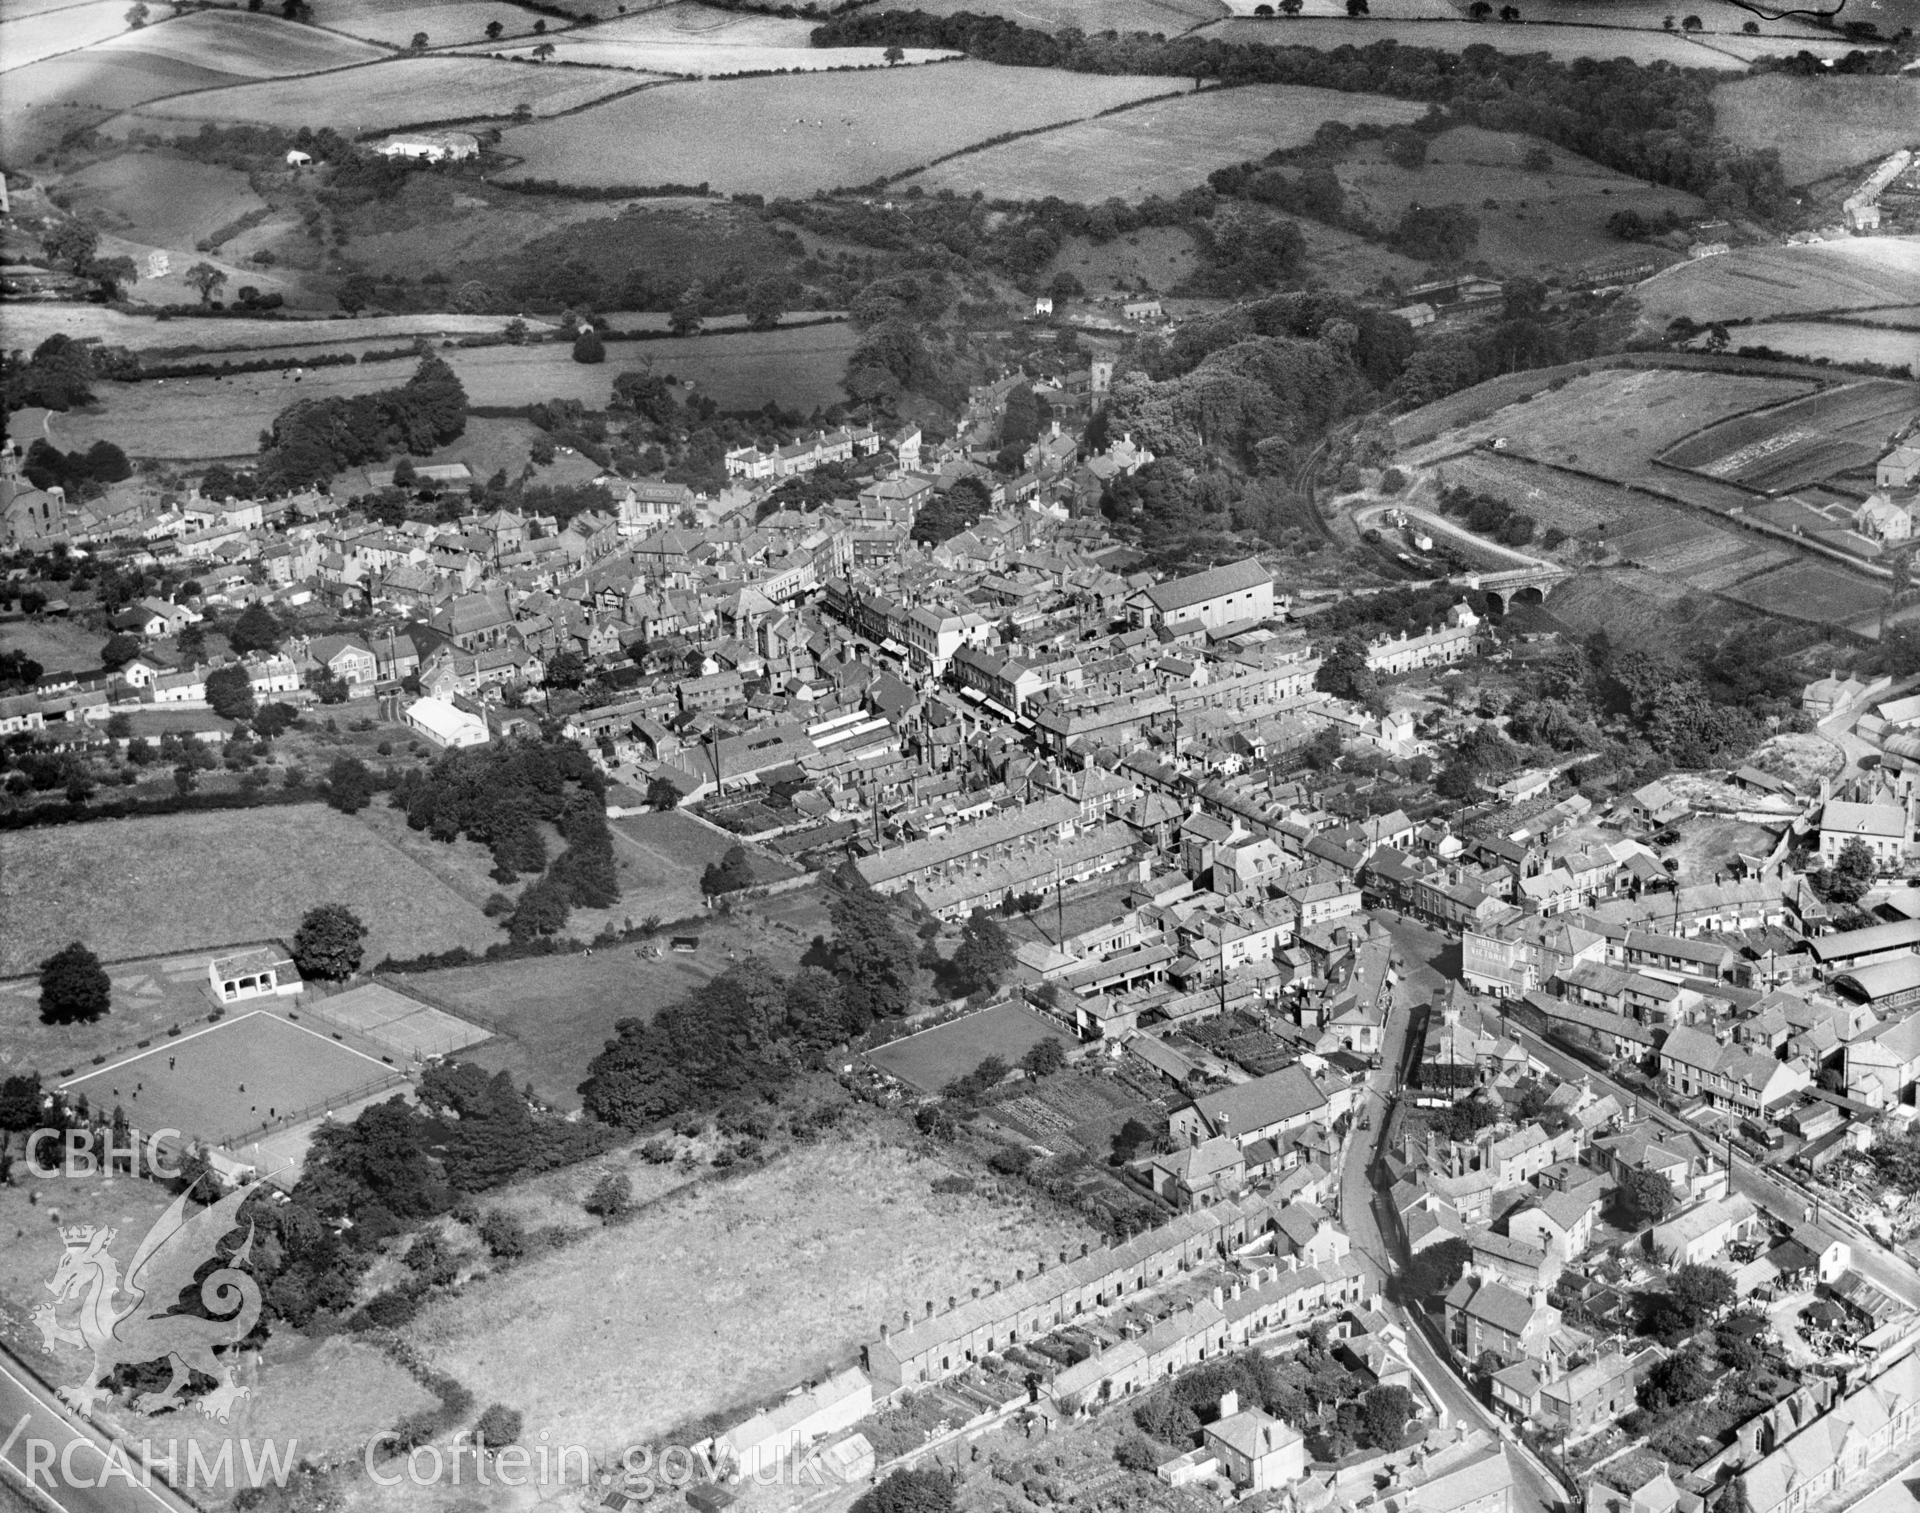 View of Holywell, showing football ground, oblique aerial view. 5?x4? black and white glass plate negative.